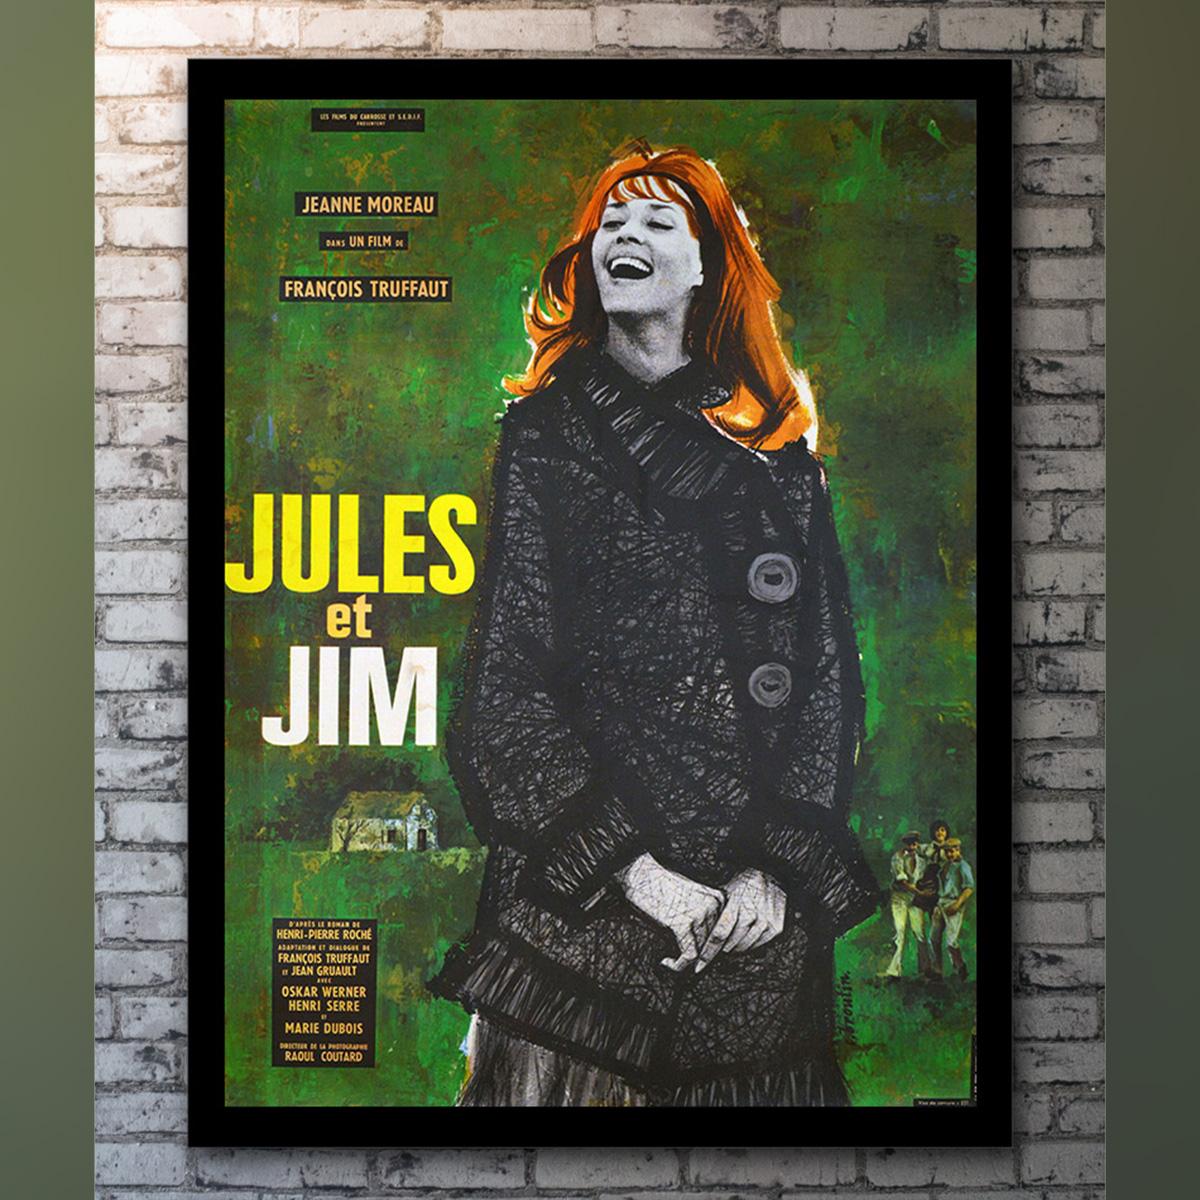 Jules et Jim filmed in 1962 was François Truffaut’s third film (after The 400 Blows in 1959 and Shoot the Piano in 1960) and was based on Henri-Pierre Roché’s semi-autobiographical novel published when the author was already seventy-four. In the